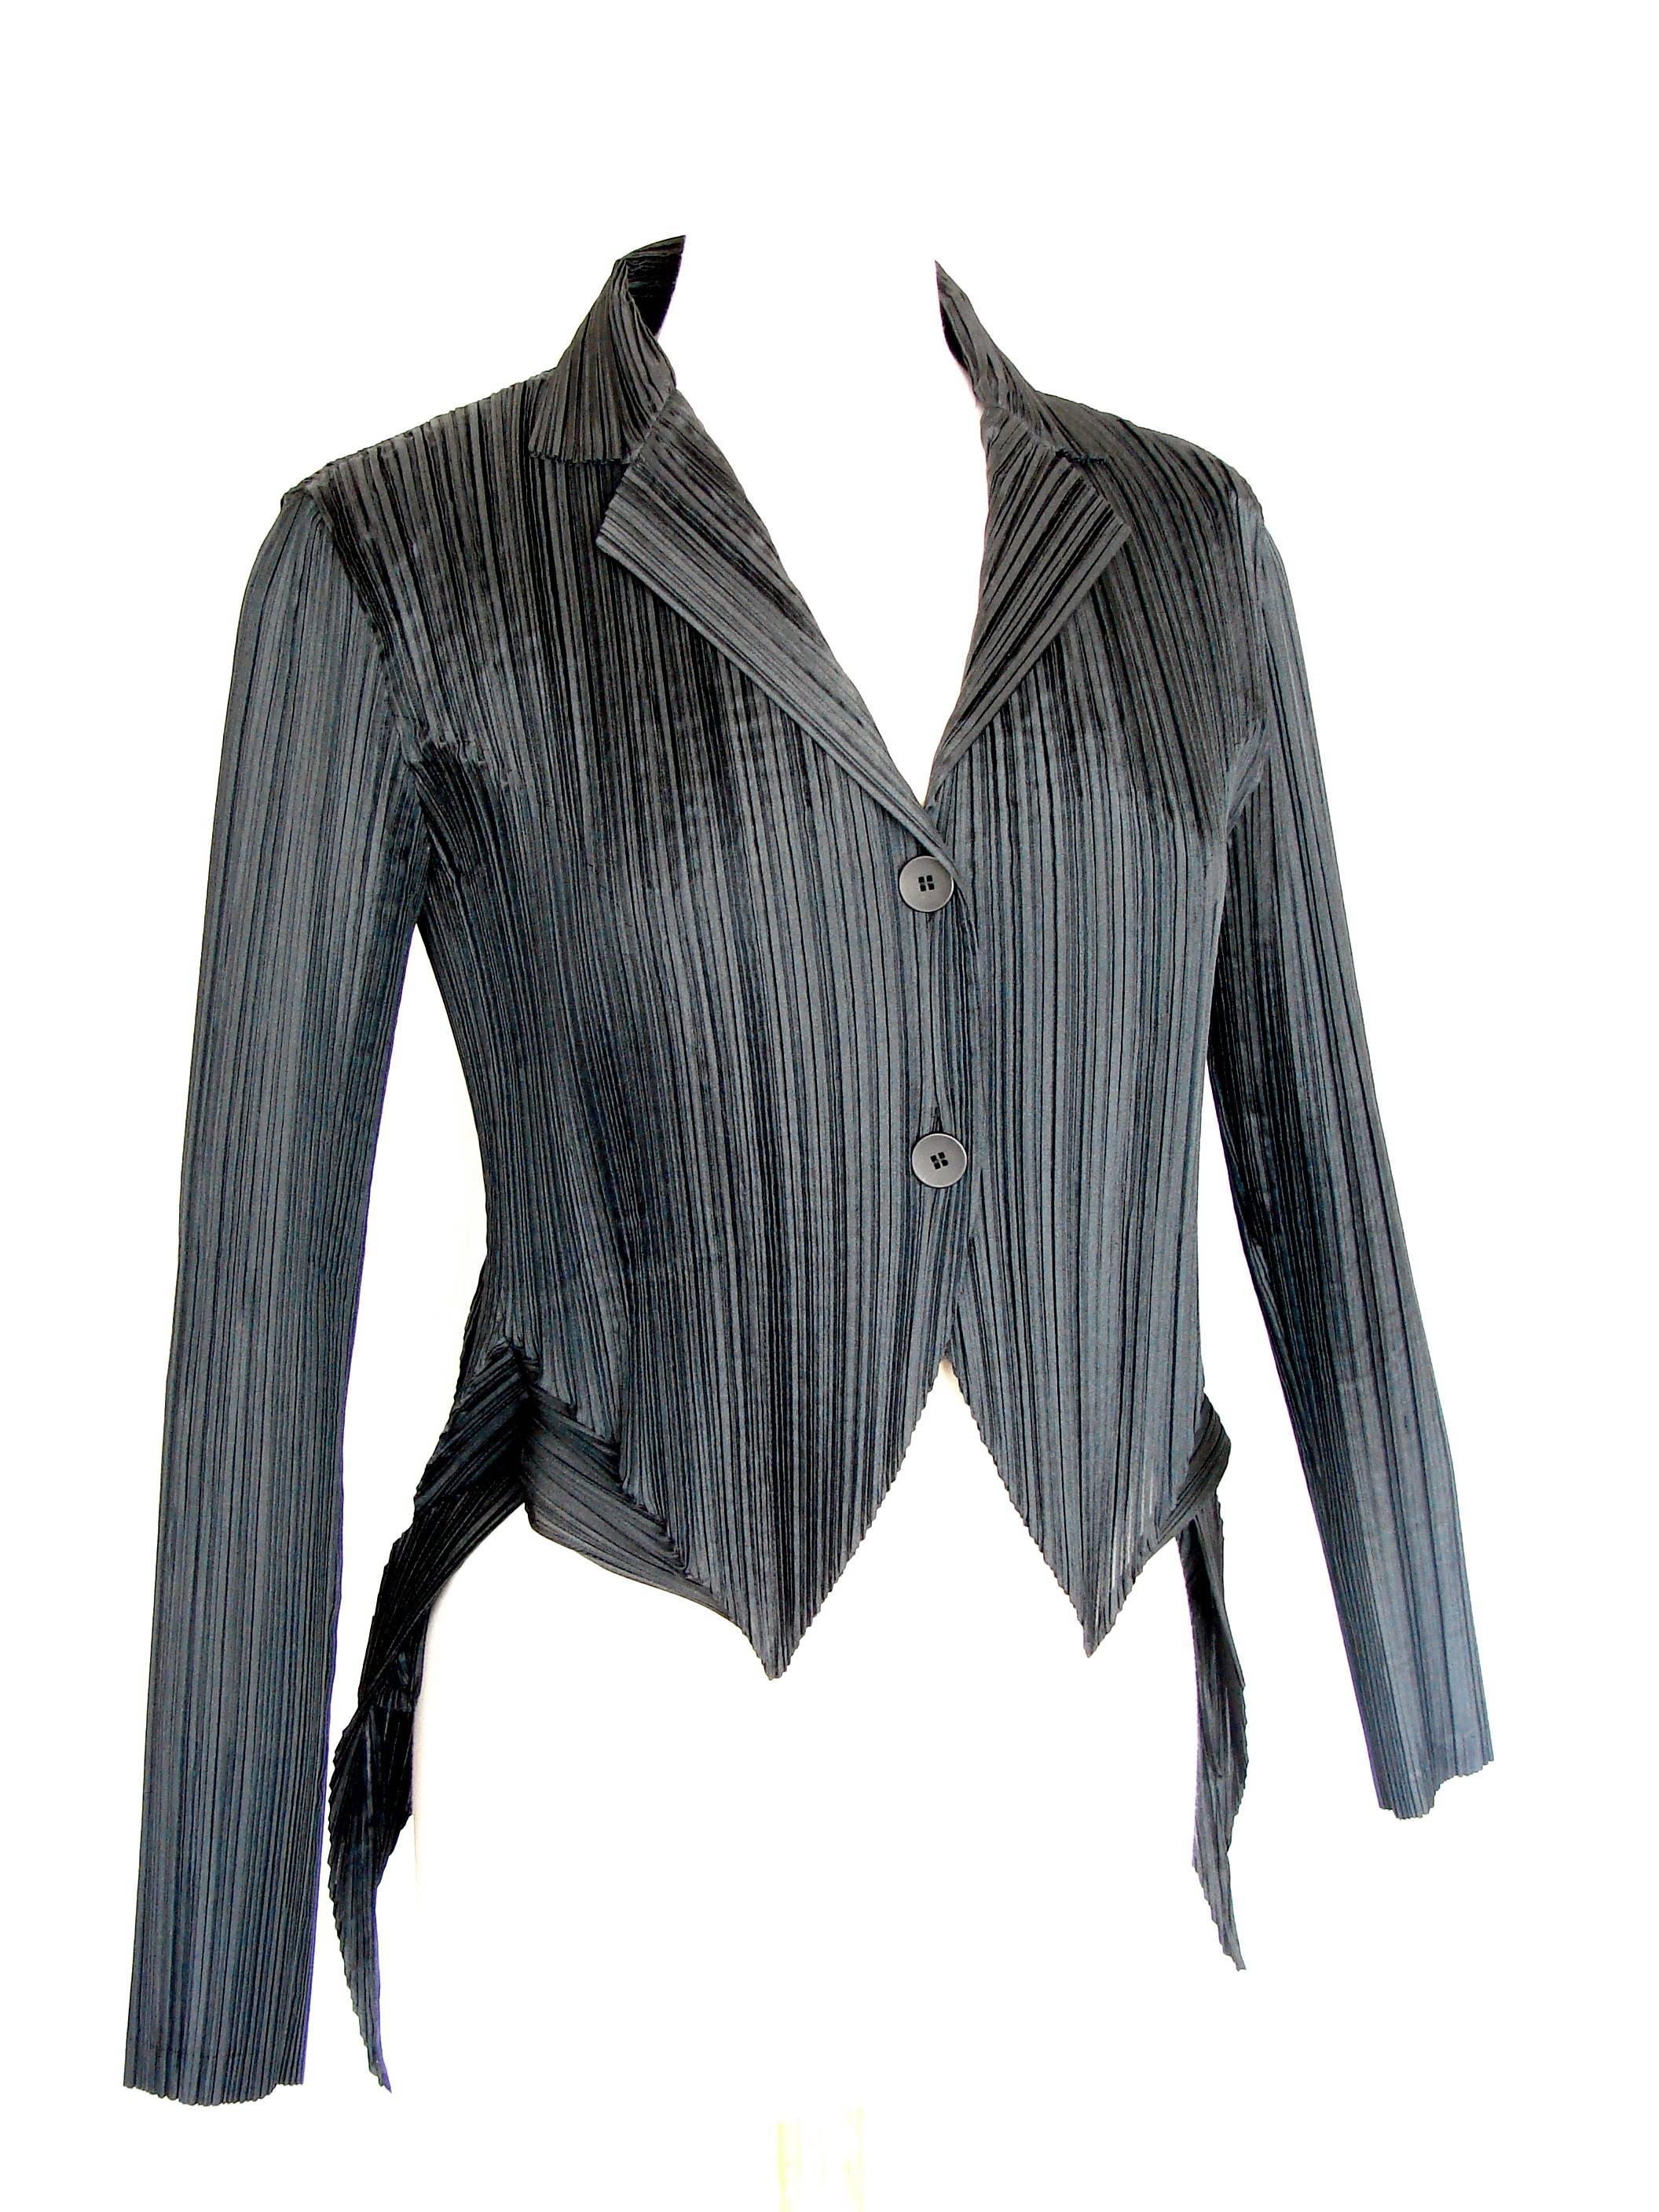 This unusual jacket was made by Issey Miyake for their FETE label in 2002.  Made from pleated polyester fabric, this piece features incredible sculptural details at the back and sides.  Unlined, it fastens in front with simple black buttons.  In